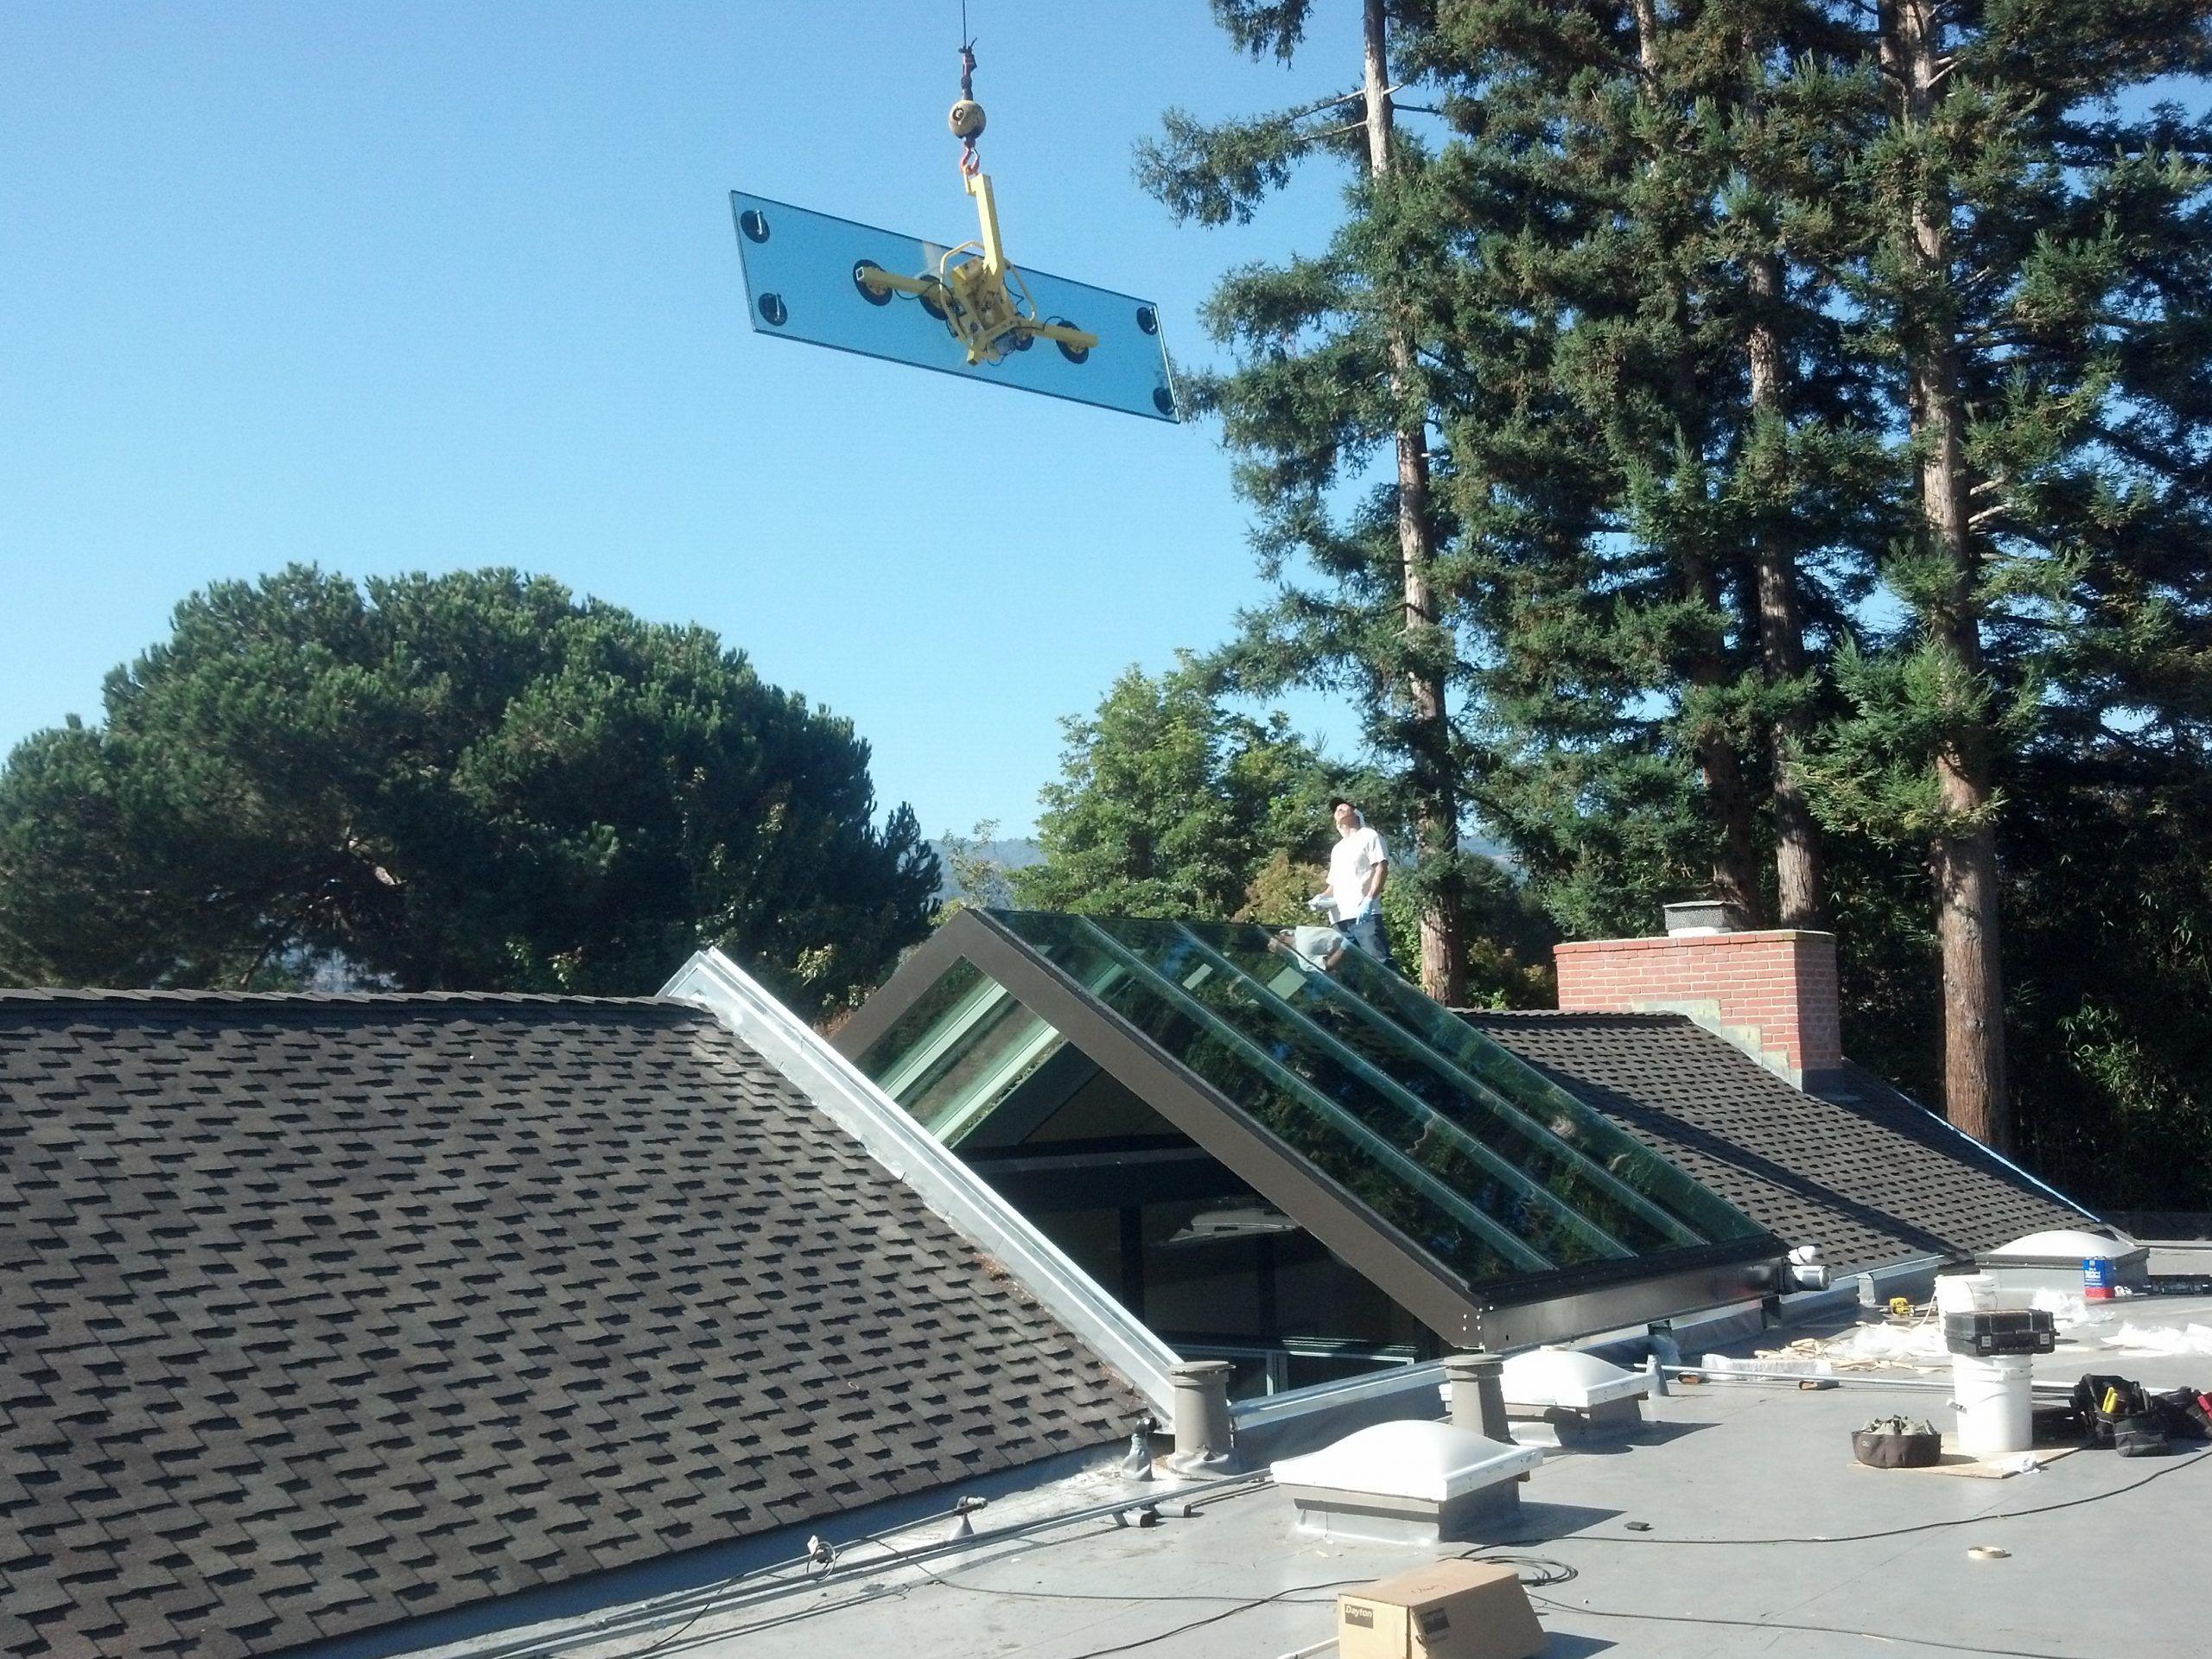 Installation over peaked roof